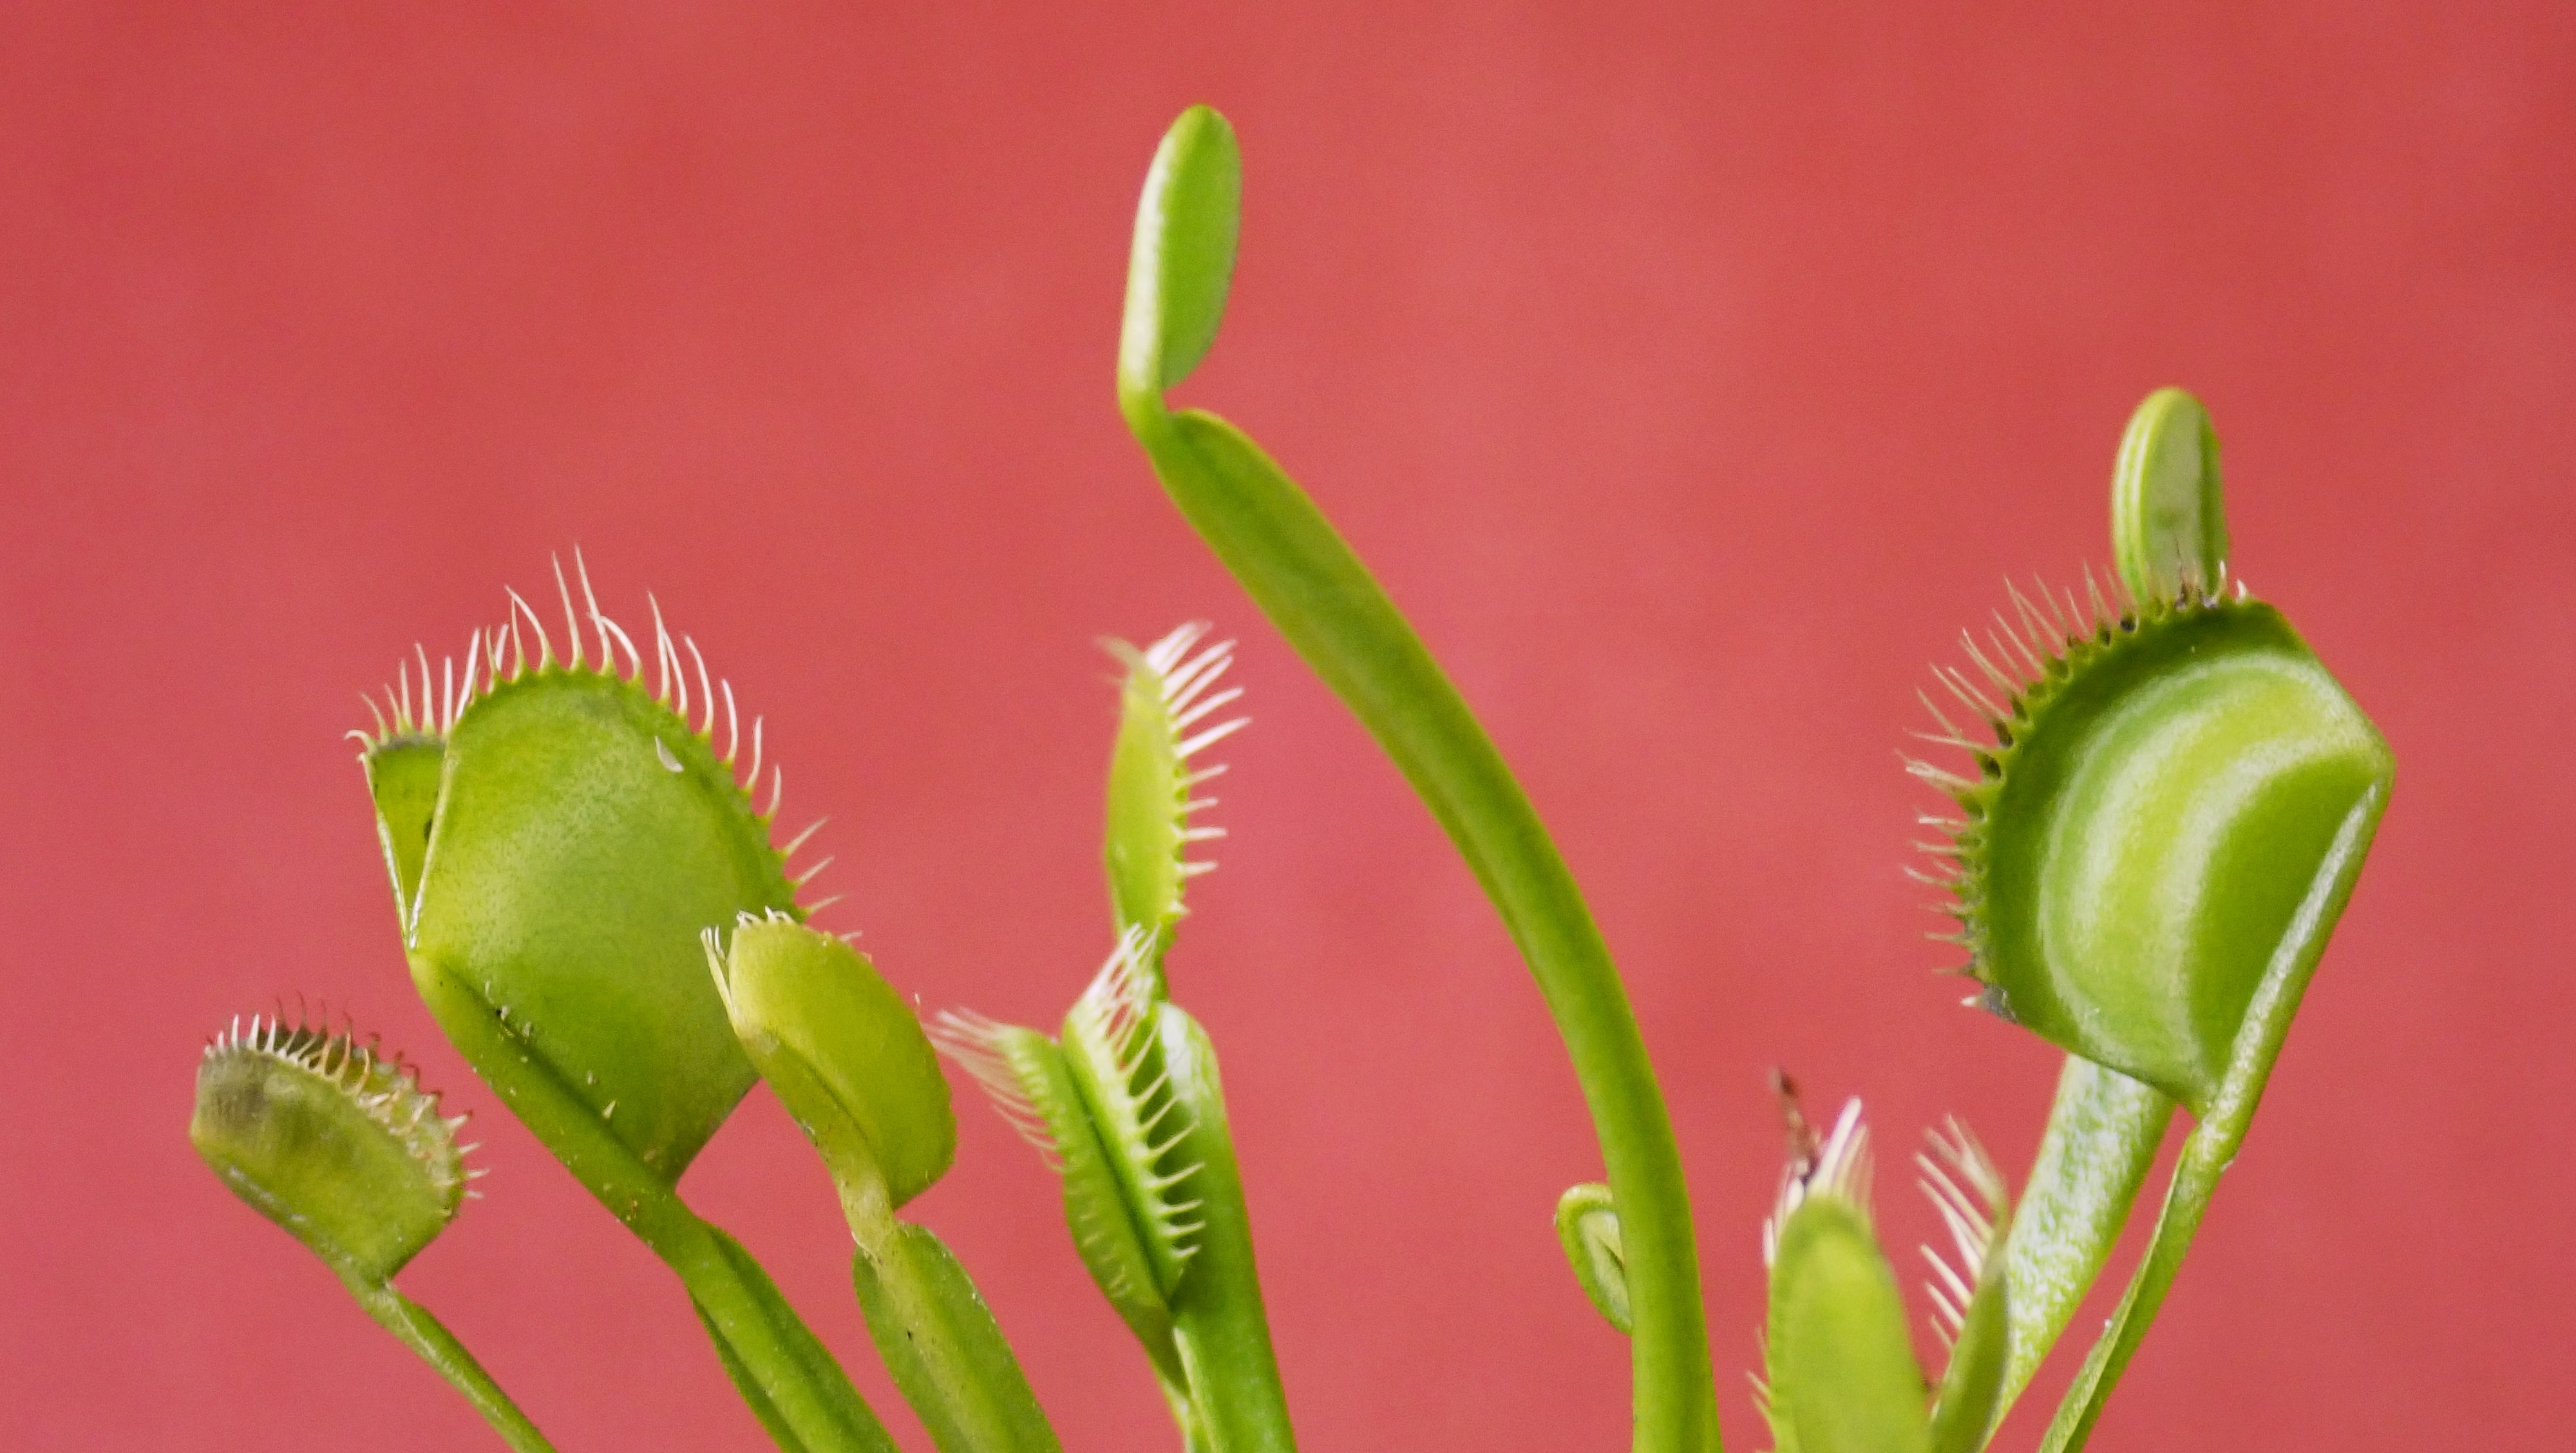 How To Grow A Venus Fly Trap Plant Indoors - The Carnivore Plant!